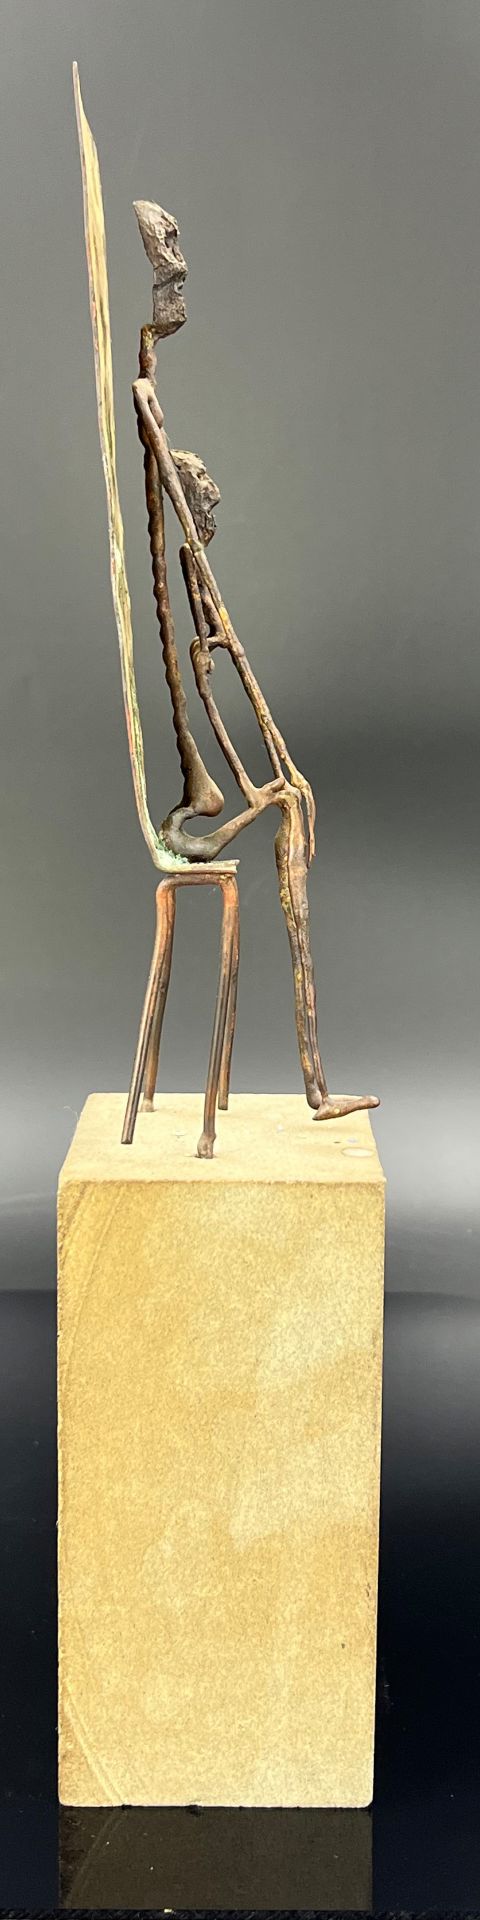 E.A. LANGENBERG (1953). Bronze. "Patriarch". - Image 5 of 9